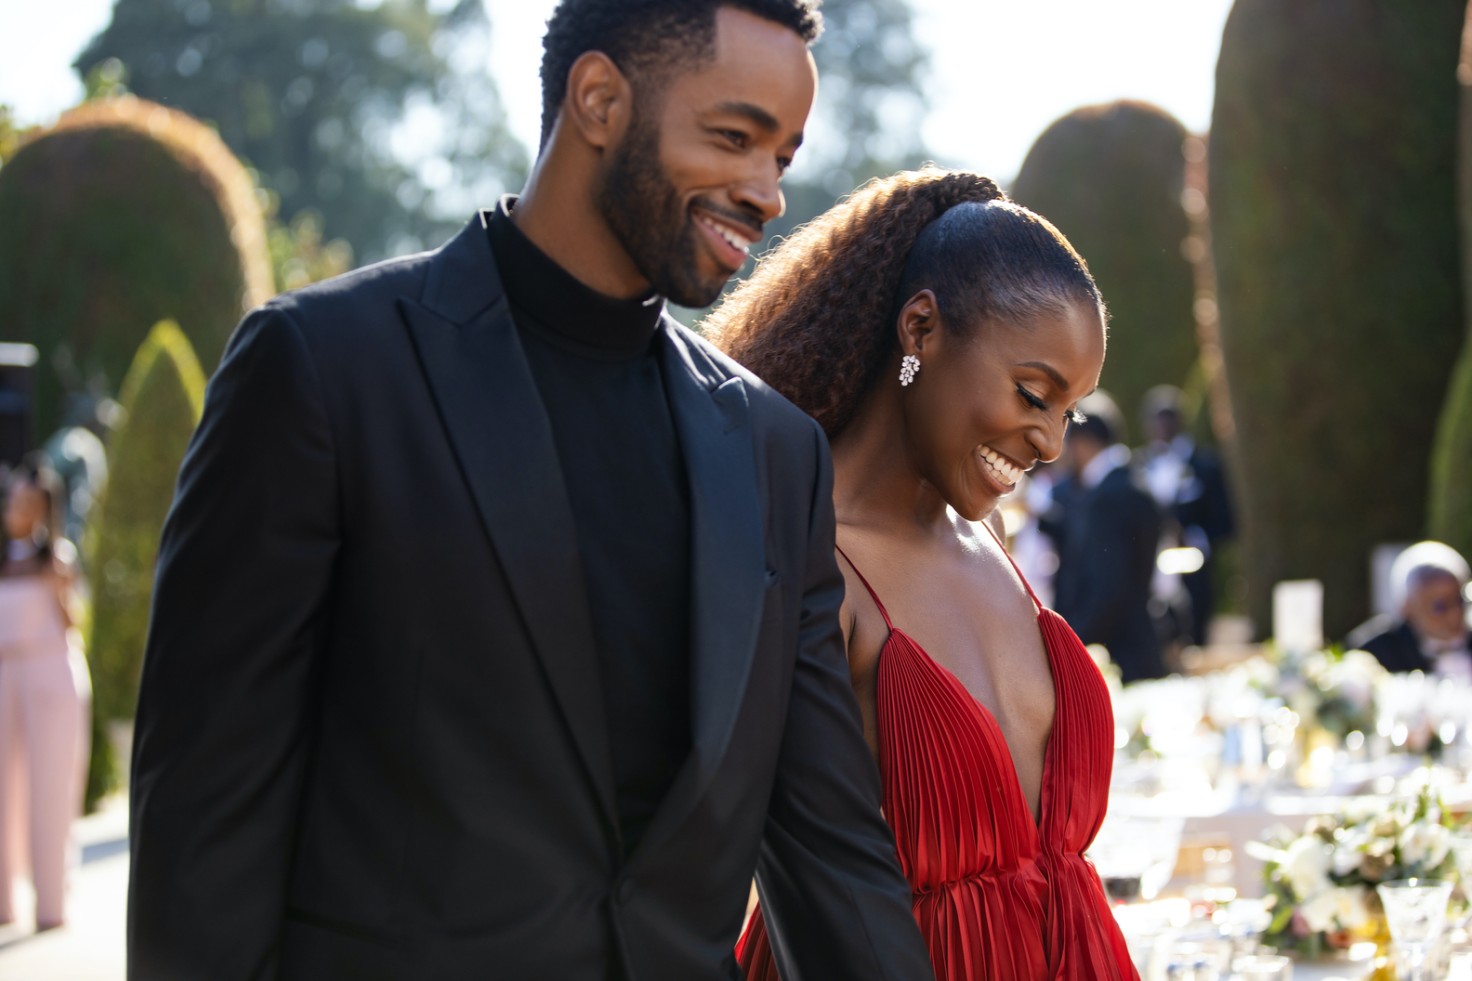 Two Black people are smiling and happy, one wears a black suit with short hair and a beard, the other - who appears to be holding their hand - wears a red dress and their long hair is tied in a ponytail. They are the characters Lawrence and Isse from Insecure.